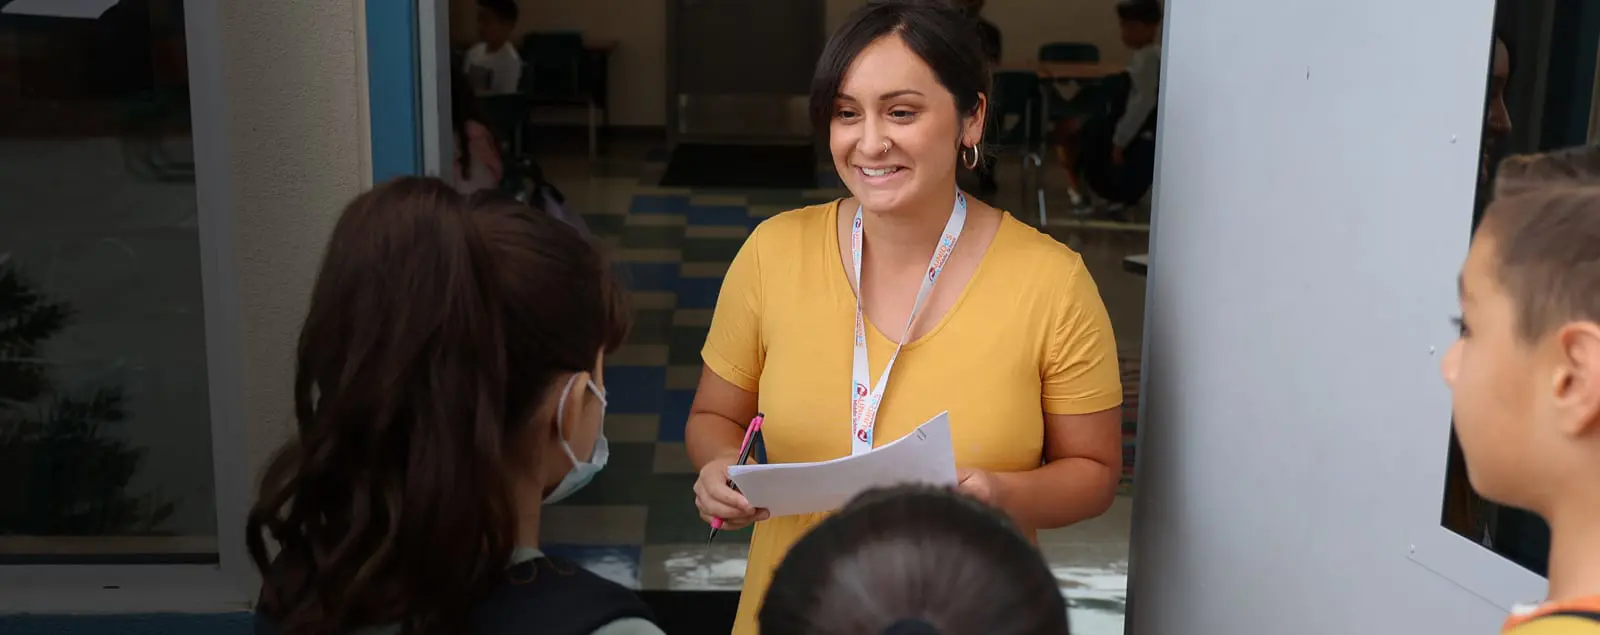 Teacher smiling at students